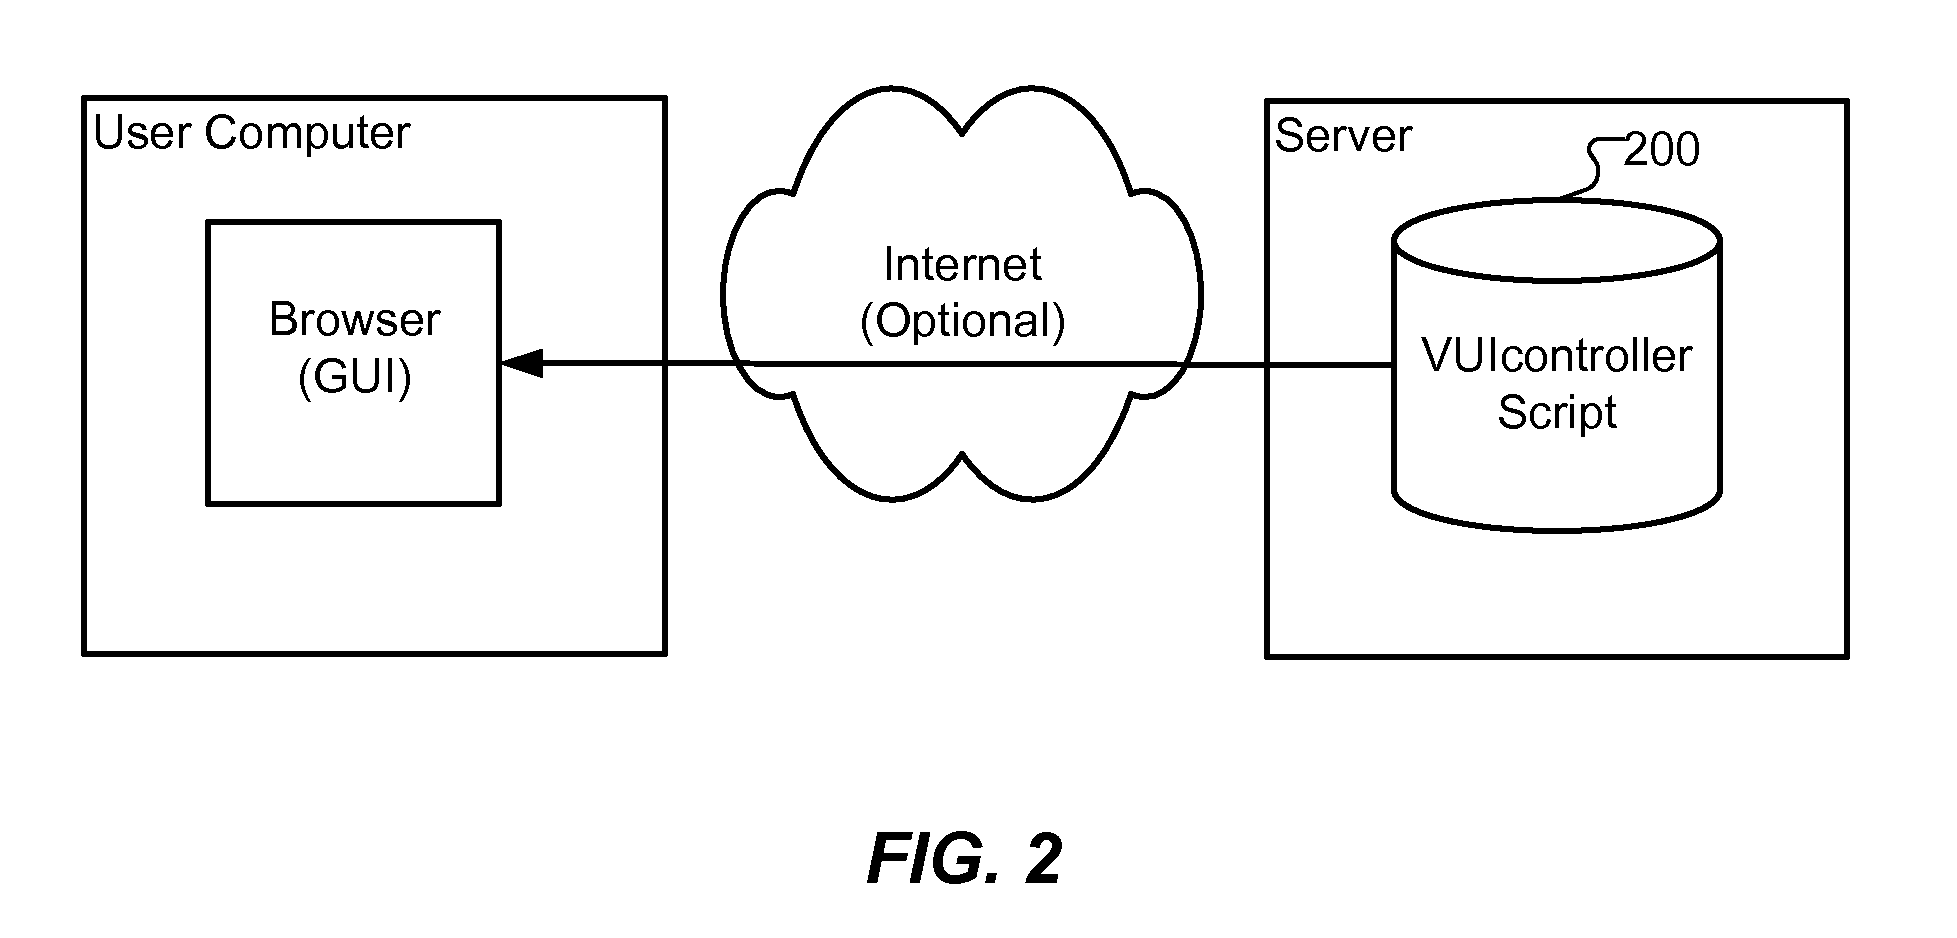 Adding Speech Capabilities to Existing Computer Applications with Complex Graphical User Interfaces